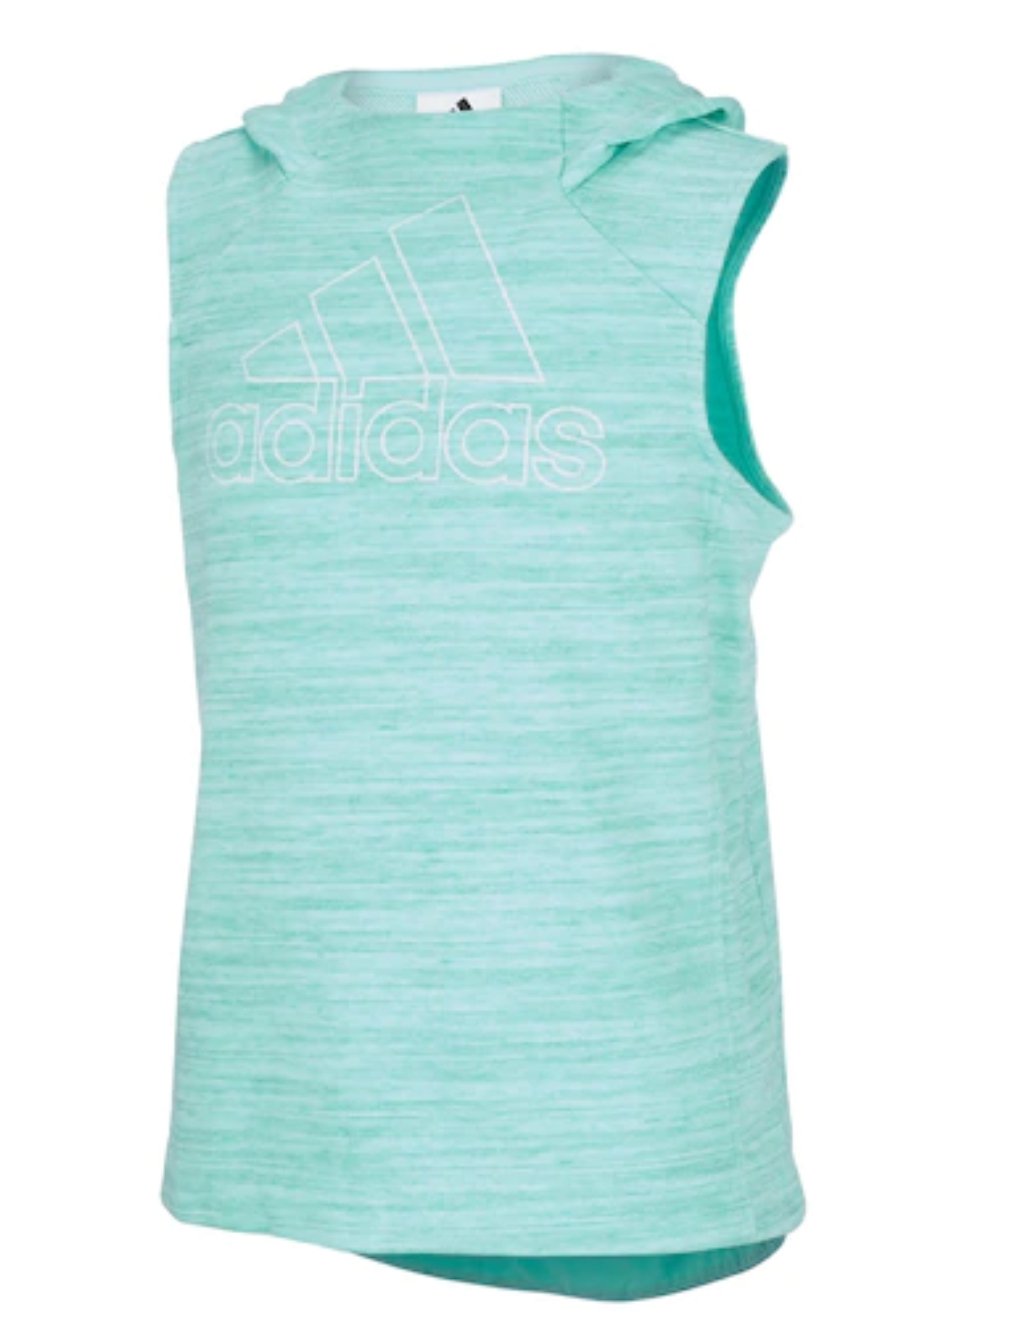 NEW Girls XL or Extra Large Adidas Mint Green French Terry Sleeveless ...